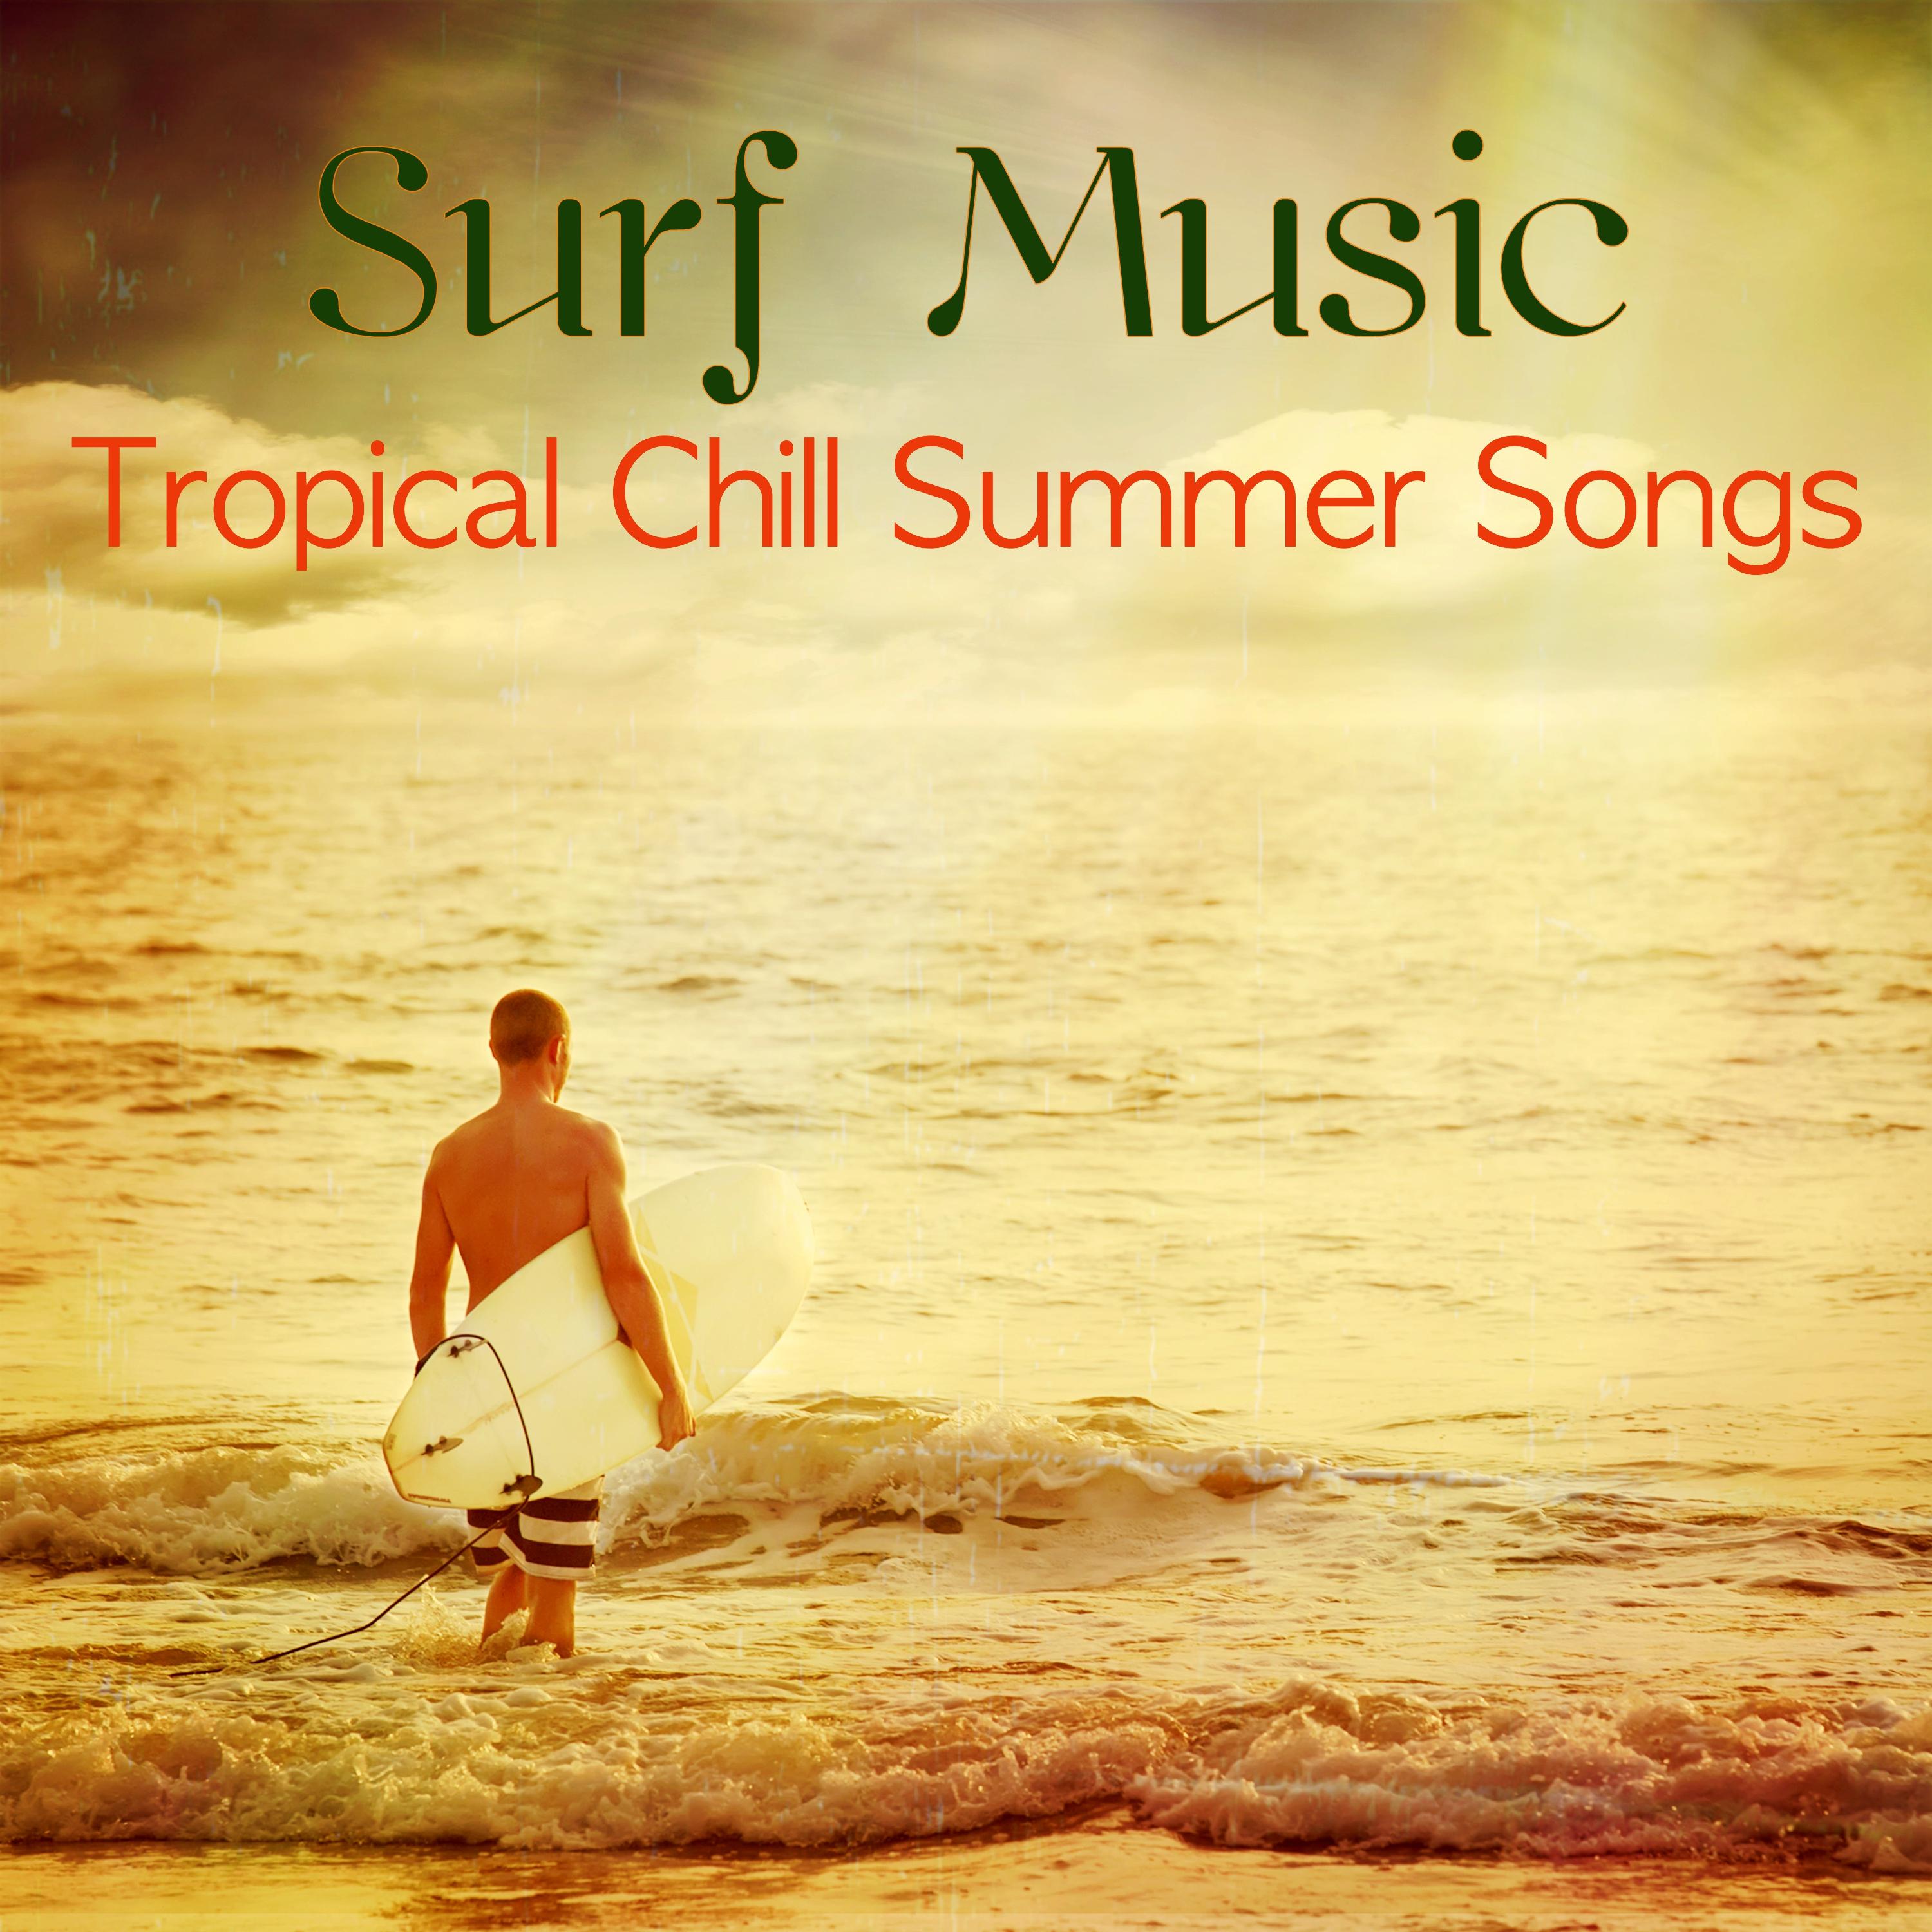 Surf Music Tropical Chill Summer Songs - Road Trip Music Following the Big Wave, Having Fun, Beach Party Songs under the Sun